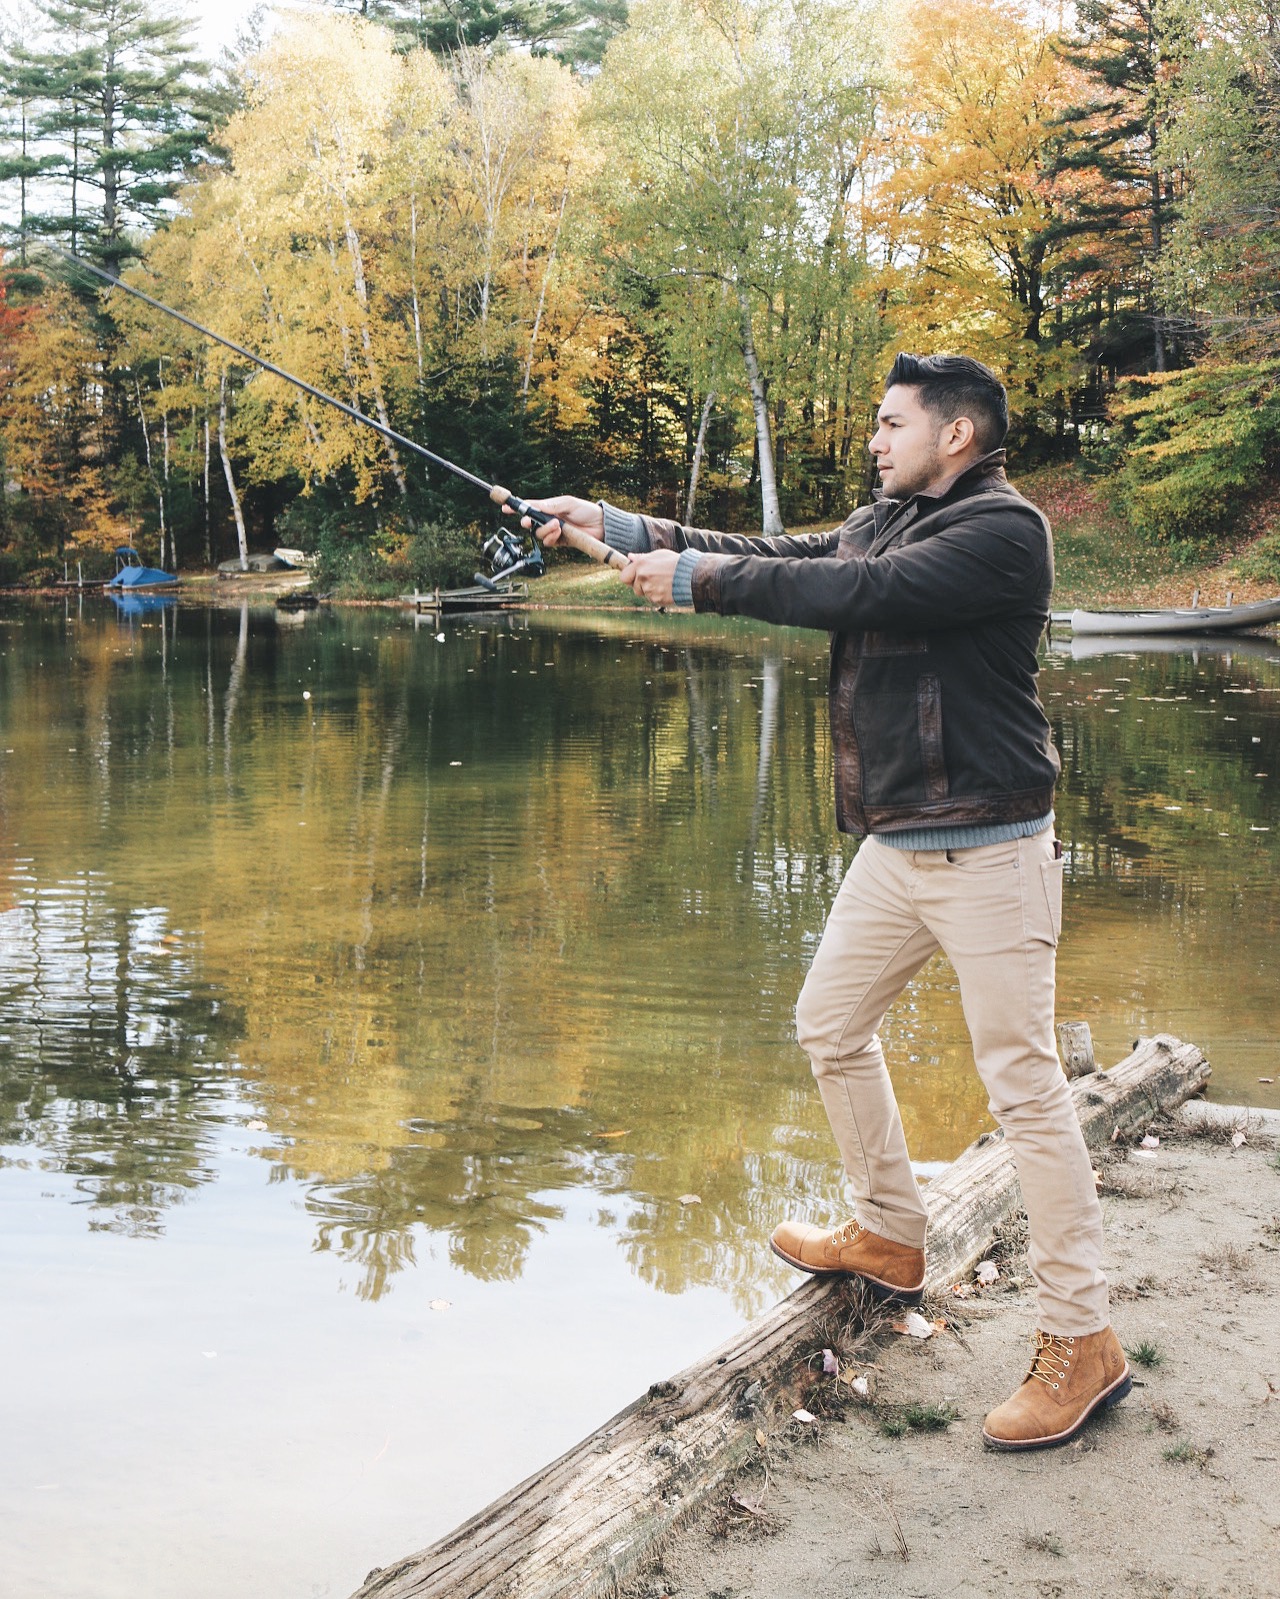 weekend at wilderness field notes- FISHING IN A FOREST - DANDY IN THE BRONX